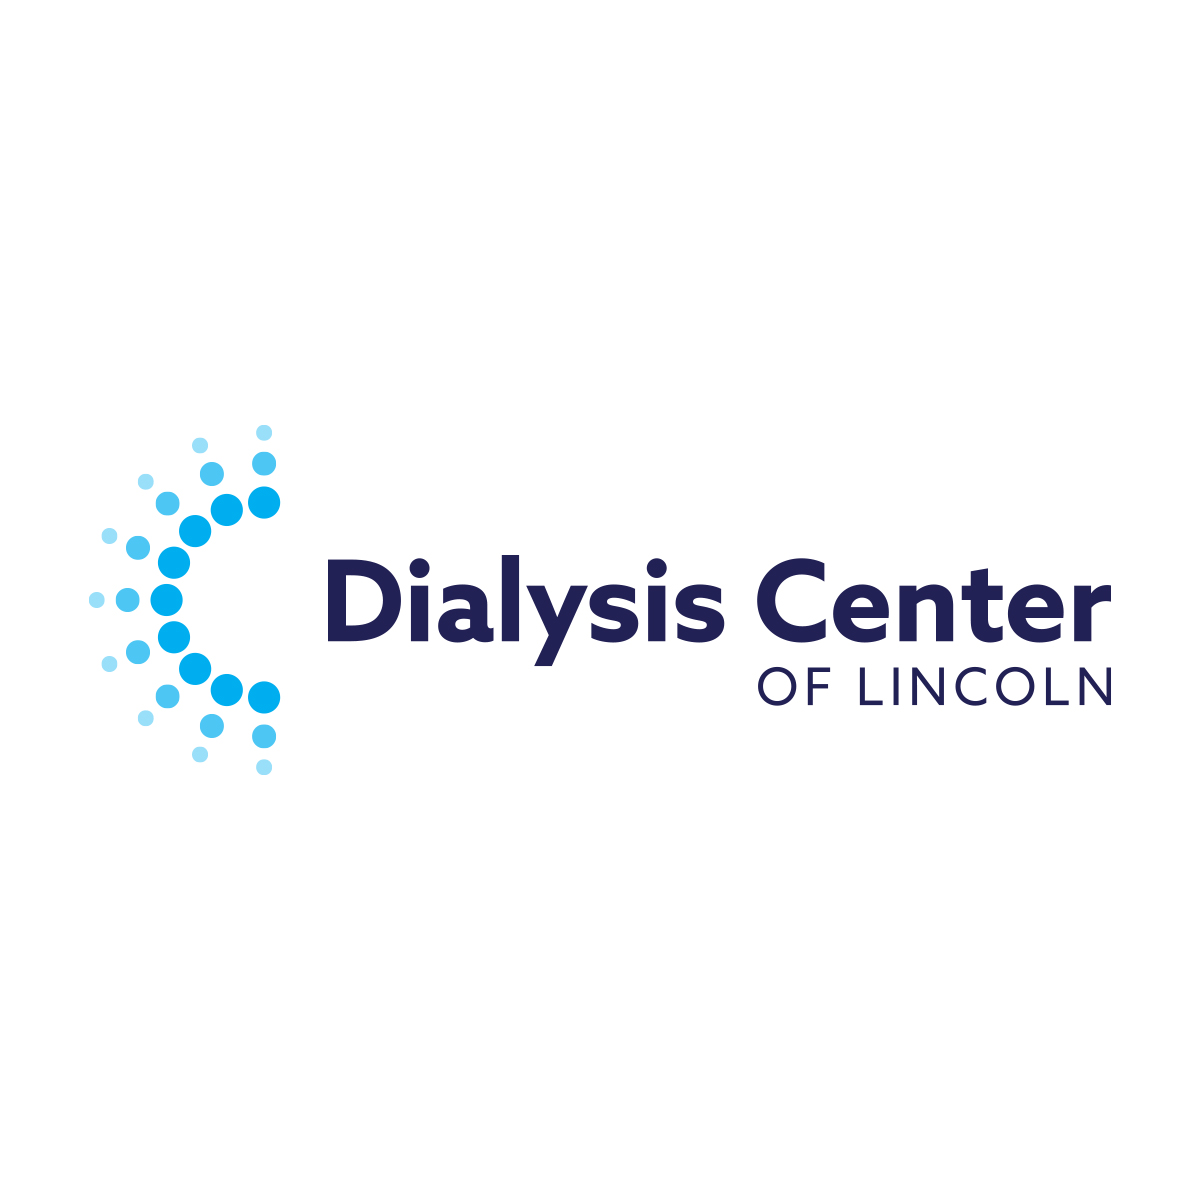 dialysis center of lincoln logo after